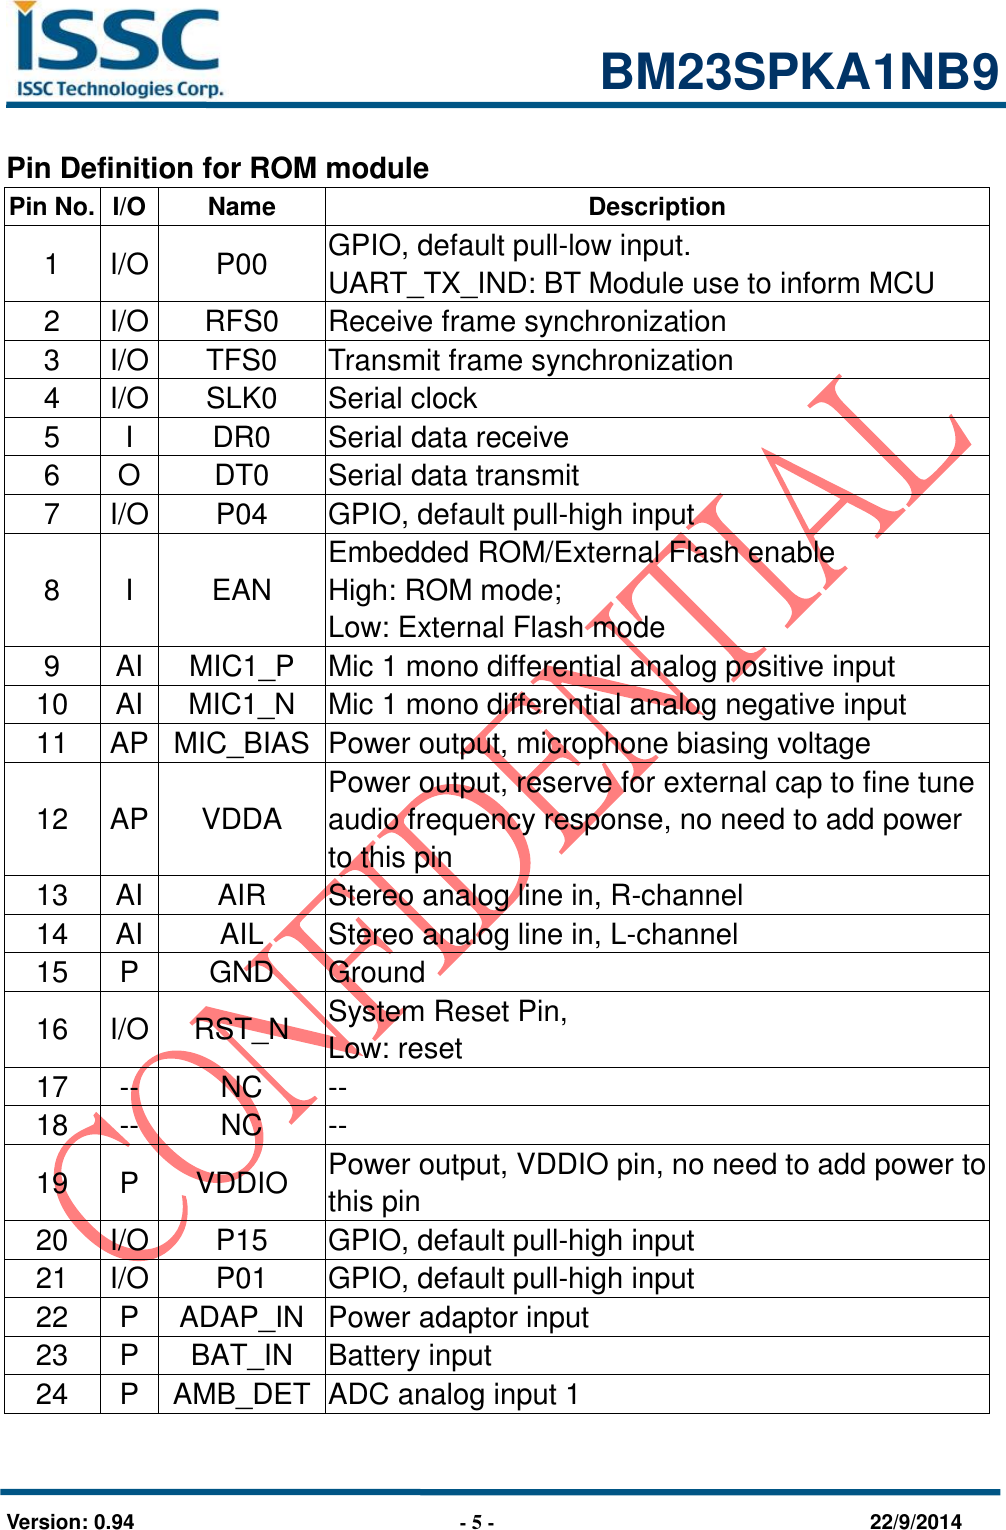                                                            BM23SPKA1NB9   Version: 0.94                              - 5 -                                    22/9/2014 Pin Definition for ROM module Pin No.   I/O Name Description 1 I/O P00 GPIO, default pull-low input. UART_TX_IND: BT Module use to inform MCU 2 I/O RFS0 Receive frame synchronization 3 I/O TFS0 Transmit frame synchronization 4 I/O SLK0 Serial clock 5 I DR0 Serial data receive 6 O DT0 Serial data transmit 7 I/O P04 GPIO, default pull-high input 8 I EAN Embedded ROM/External Flash enable High: ROM mode; Low: External Flash mode 9 AI MIC1_P Mic 1 mono differential analog positive input 10 AI MIC1_N Mic 1 mono differential analog negative input 11 AP MIC_BIAS Power output, microphone biasing voltage 12 AP VDDA Power output, reserve for external cap to fine tune audio frequency response, no need to add power to this pin 13 AI AIR Stereo analog line in, R-channel 14 AI AIL Stereo analog line in, L-channel 15 P GND Ground 16 I/O RST_N System Reset Pin, Low: reset 17 -- NC -- 18 -- NC -- 19 P VDDIO Power output, VDDIO pin, no need to add power to this pin 20 I/O P15 GPIO, default pull-high input 21 I/O P01 GPIO, default pull-high input 22 P ADAP_IN Power adaptor input 23 P BAT_IN Battery input 24 P AMB_DET ADC analog input 1 